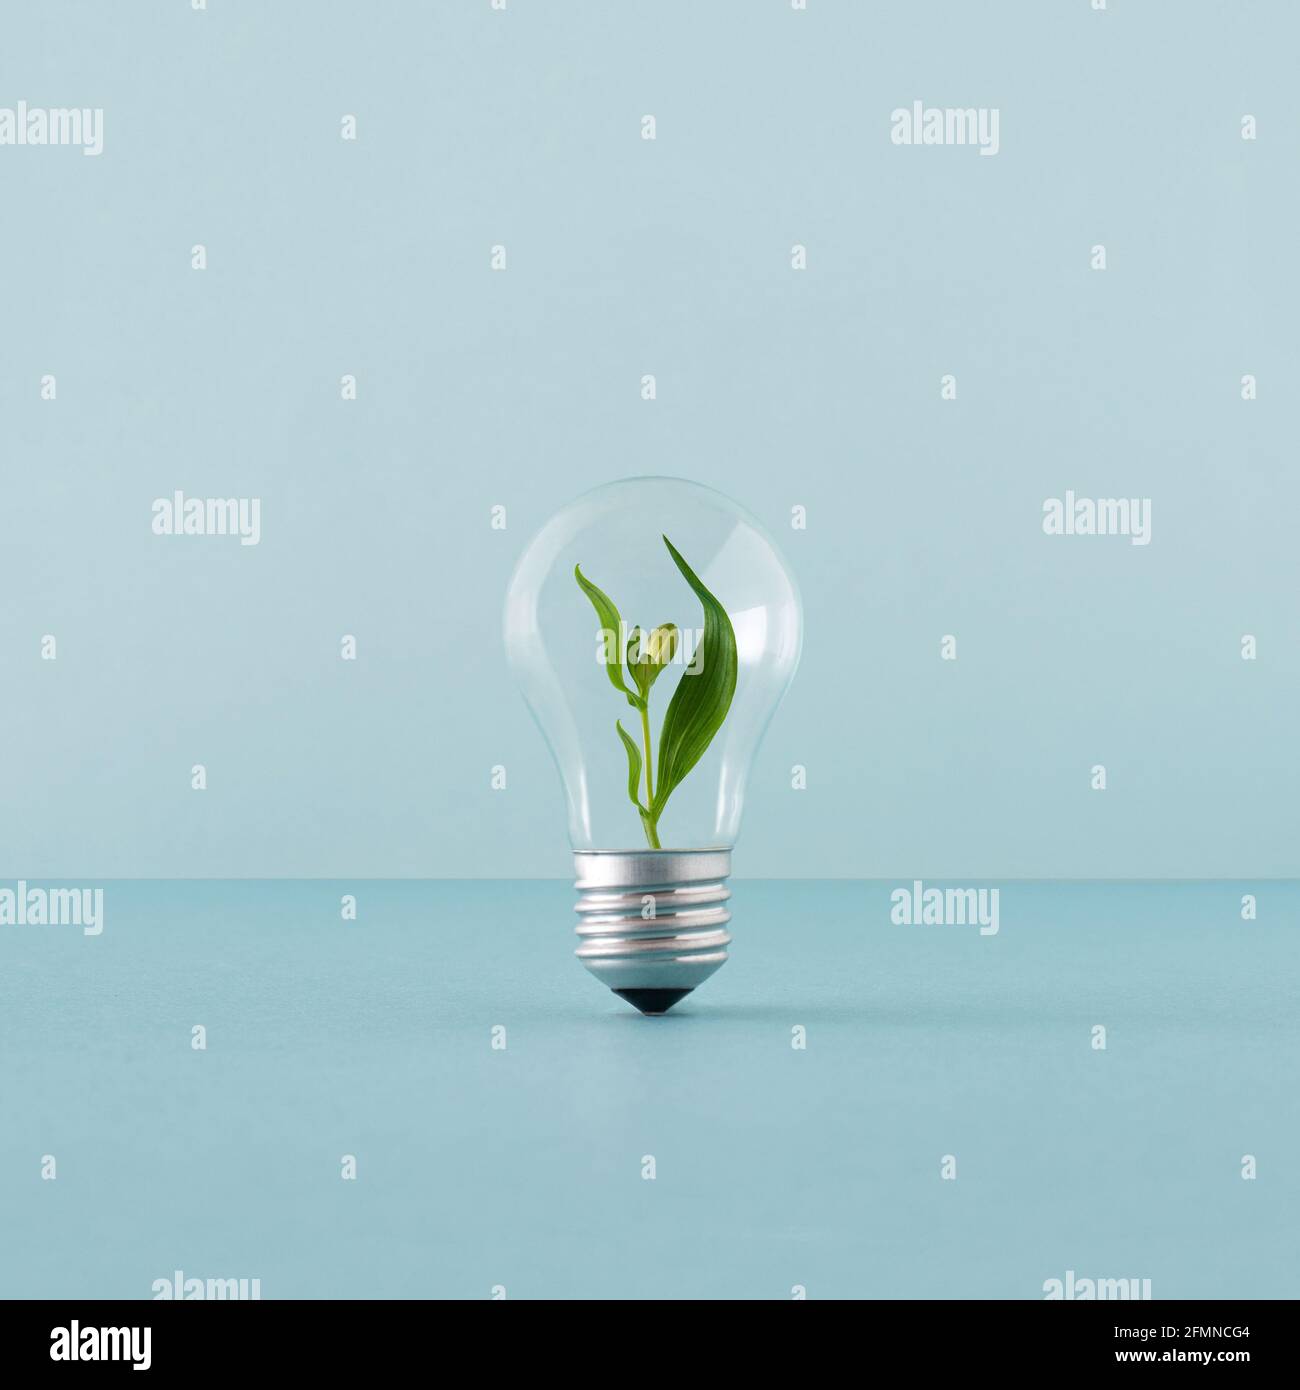 Creative layout with a plant growing inside the light bulb. Green eco energy concept. Stock Photo